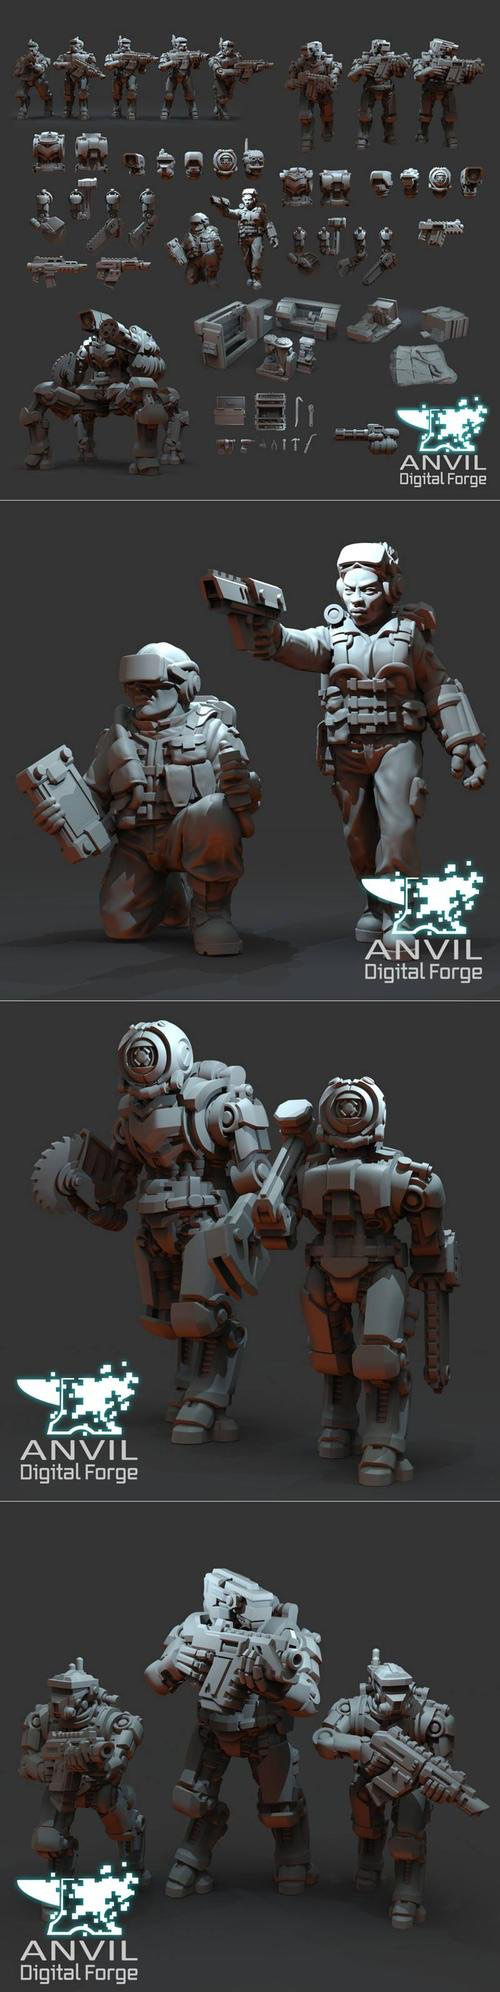 Anvil Digital Forge - Regiments and Exo-Lord Automata 3D Print